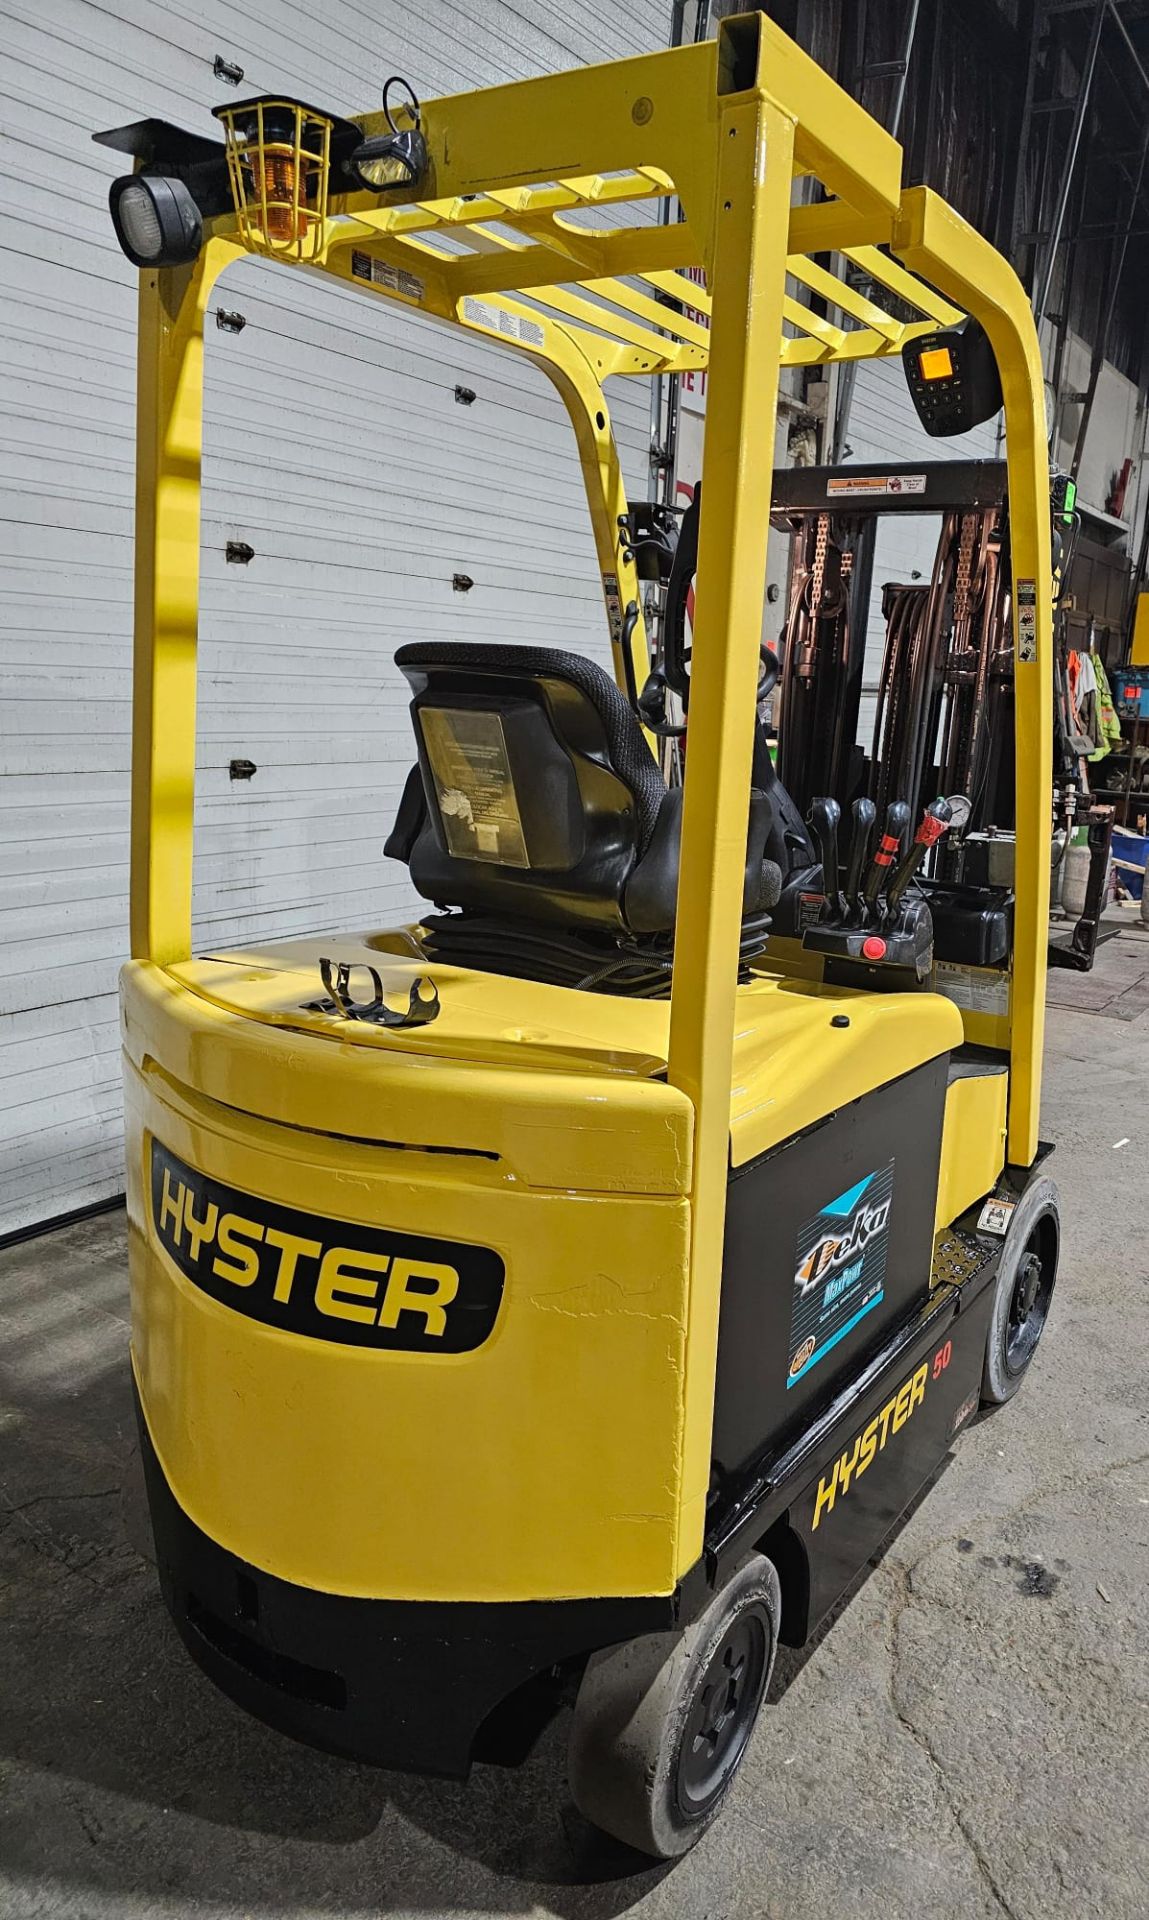 2014 Hyster 5,000lbs Capacity Electric Forklift 48V with sideshift 3-STAGE MAST 189" load height - Image 5 of 8